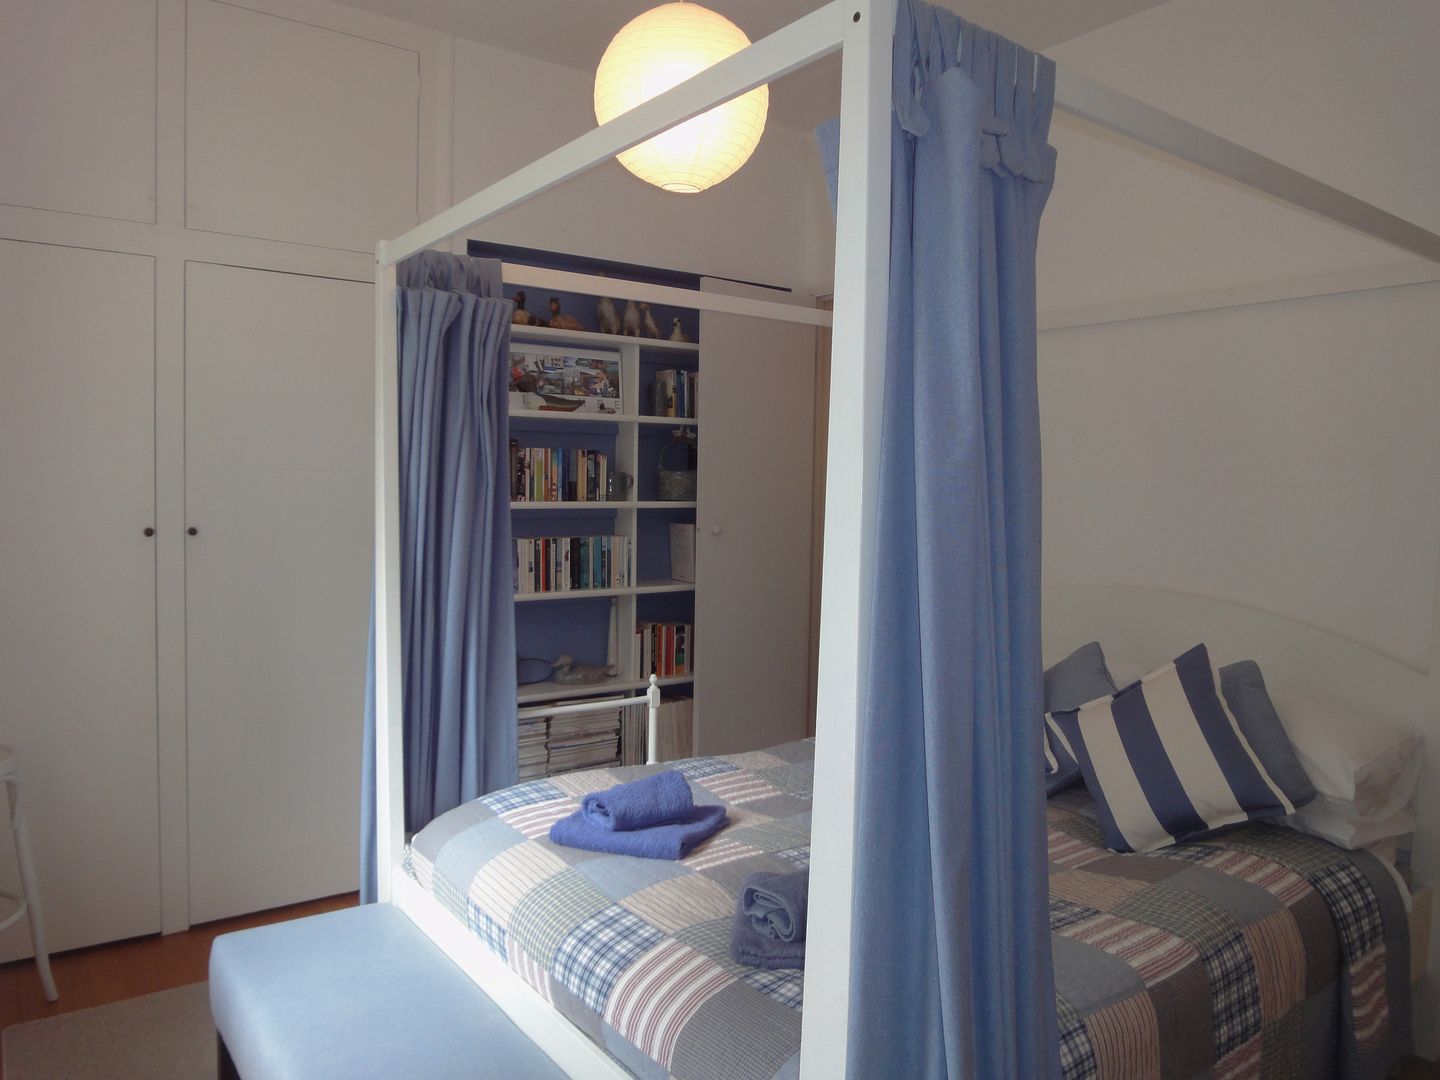 Flat 2 Salcombe Four Poster Bed